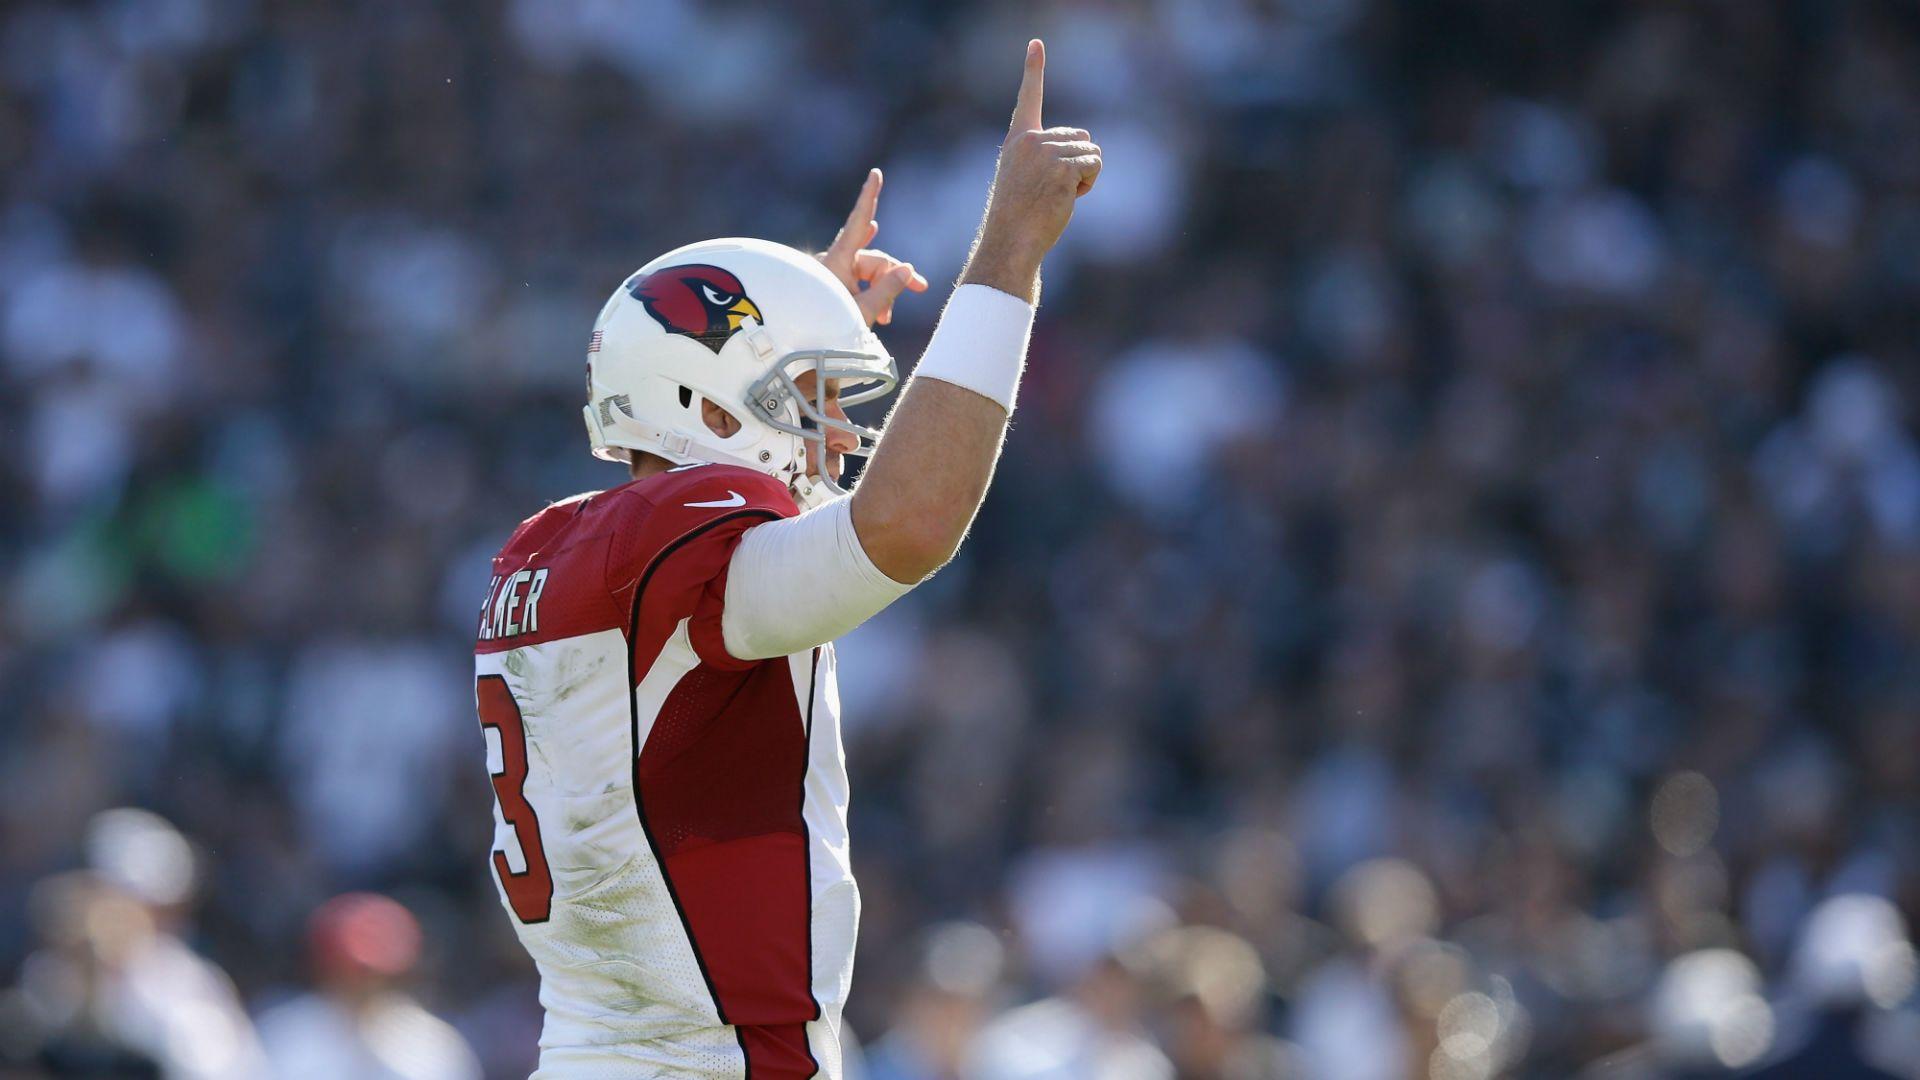 Carson Palmer taking on Bengals amid strong emotions: 'He quit